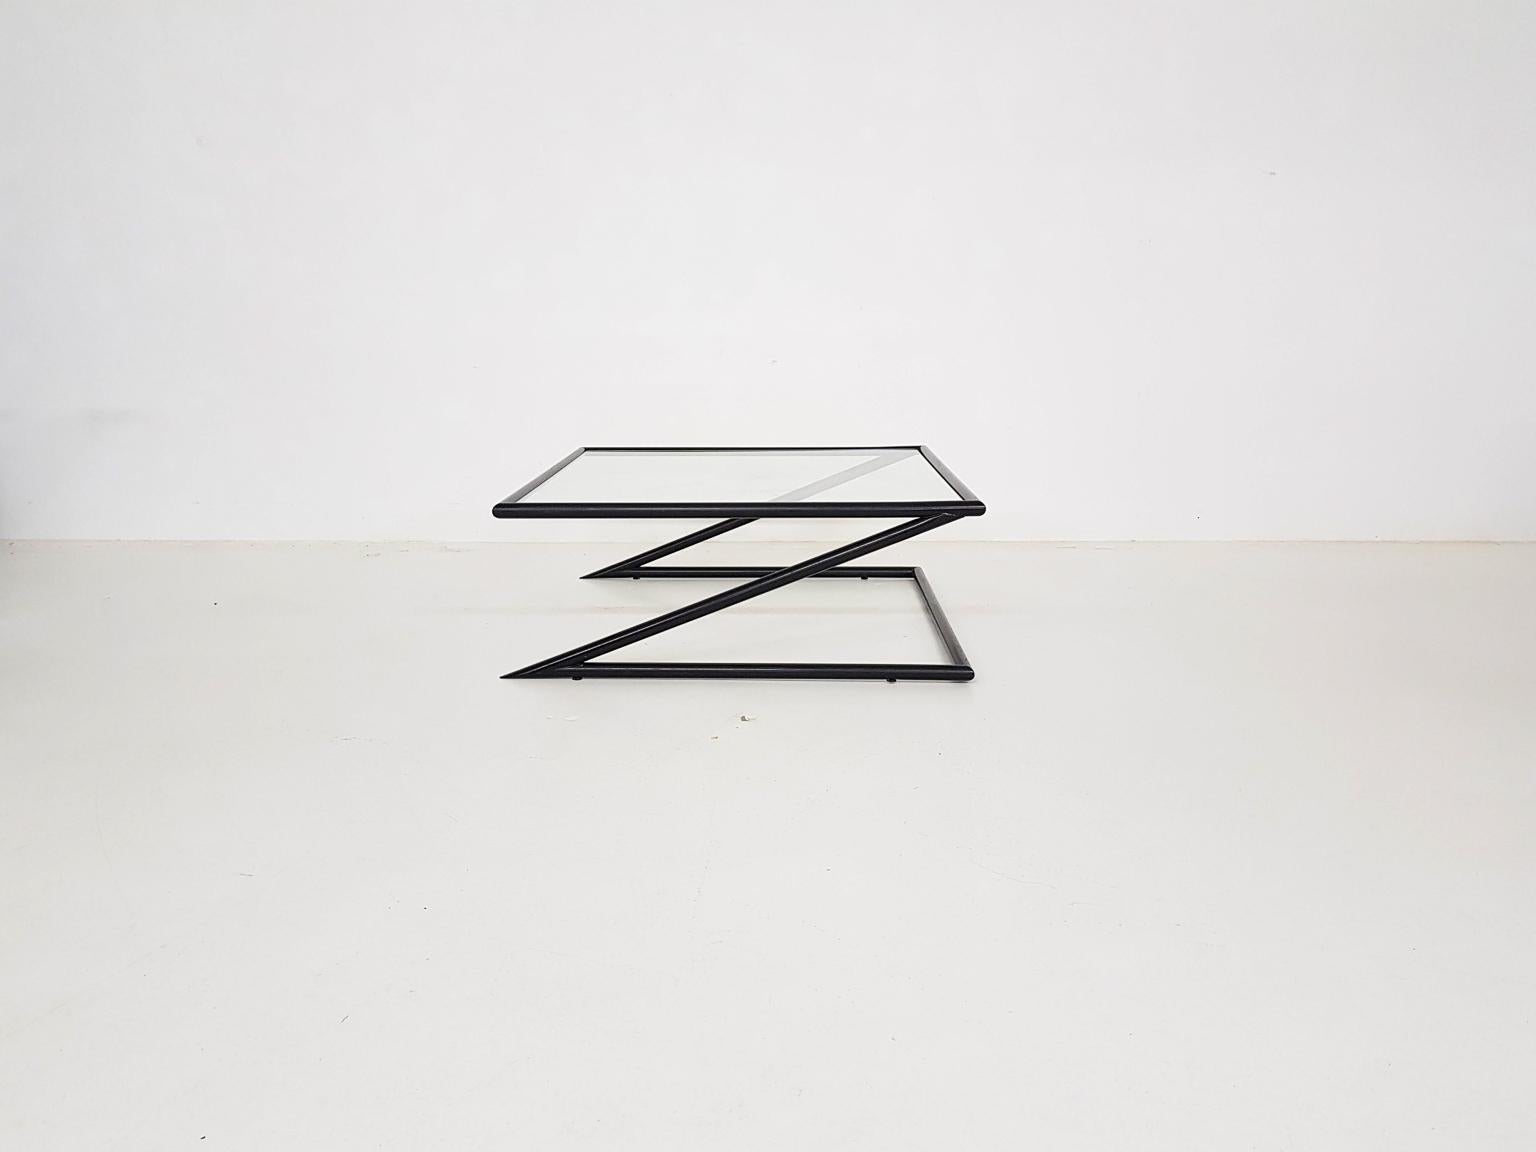 Mid-Century Modern Geometric Glass and Metal “Z” Coffee Table by Harvink, the Netherlands, 1980s